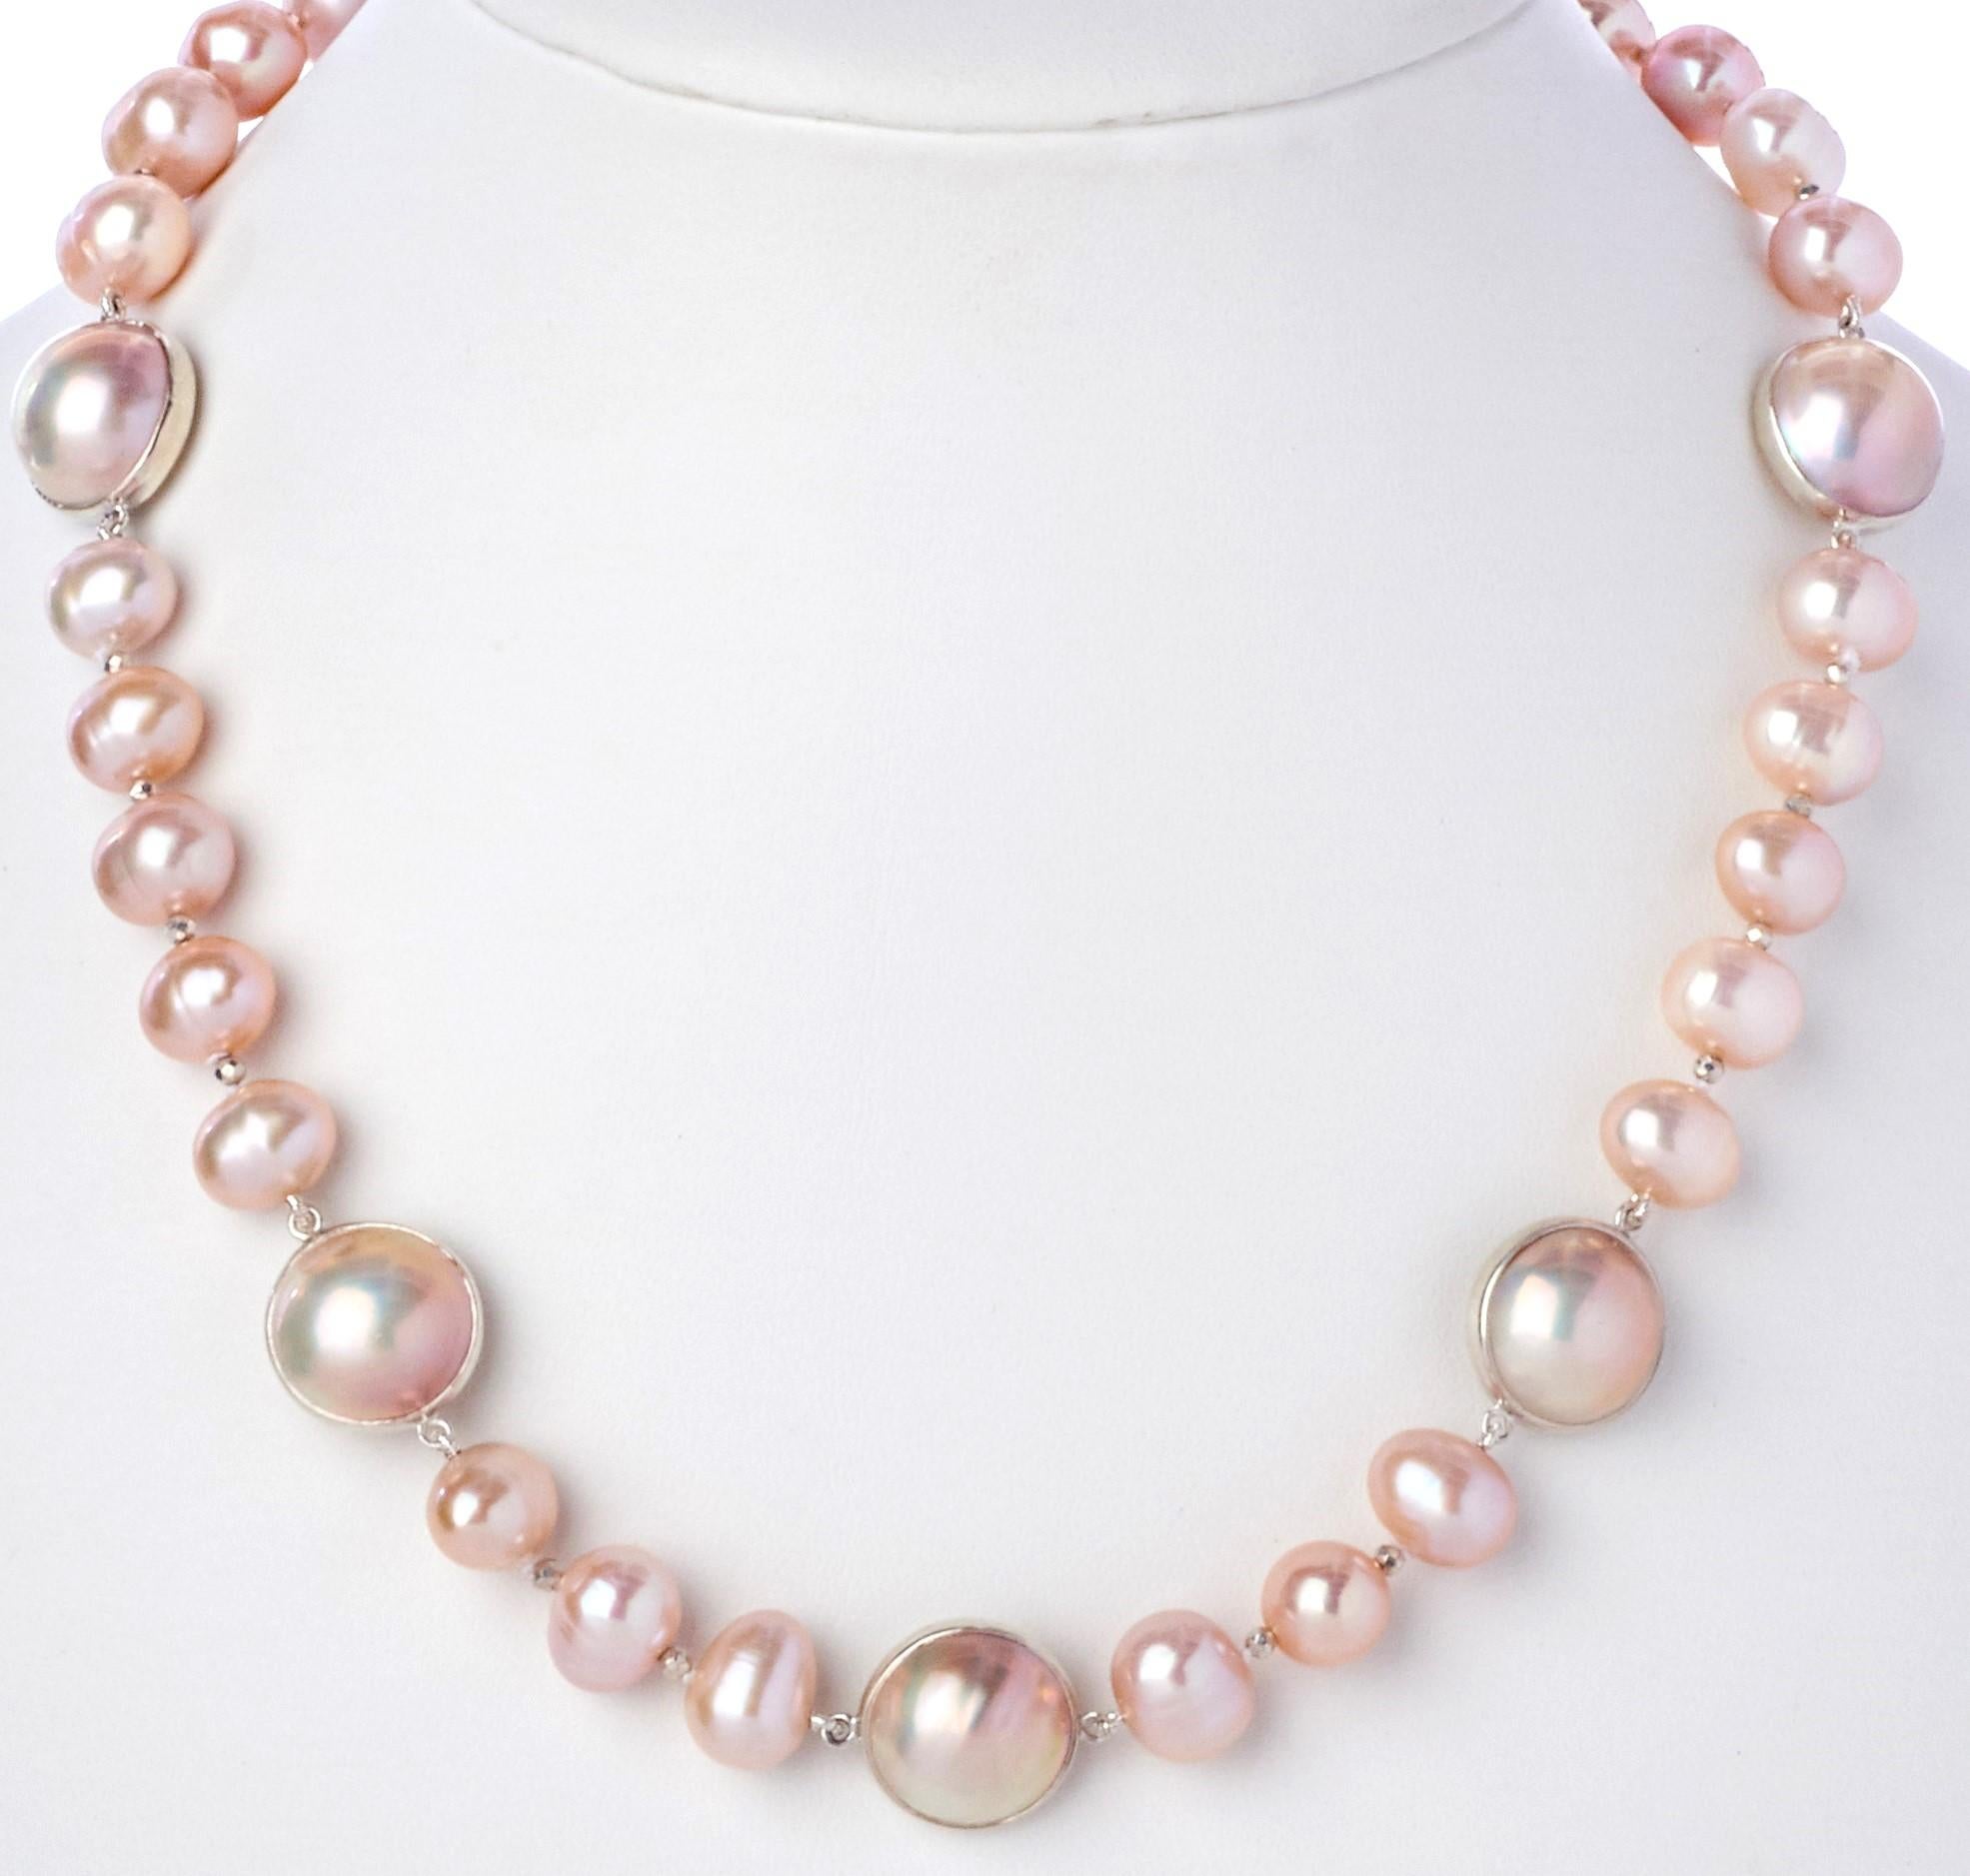 Blush Button and Mabe Pearl Necklace with Sterling Link Clasp In New Condition For Sale In Mount Kisco, NY